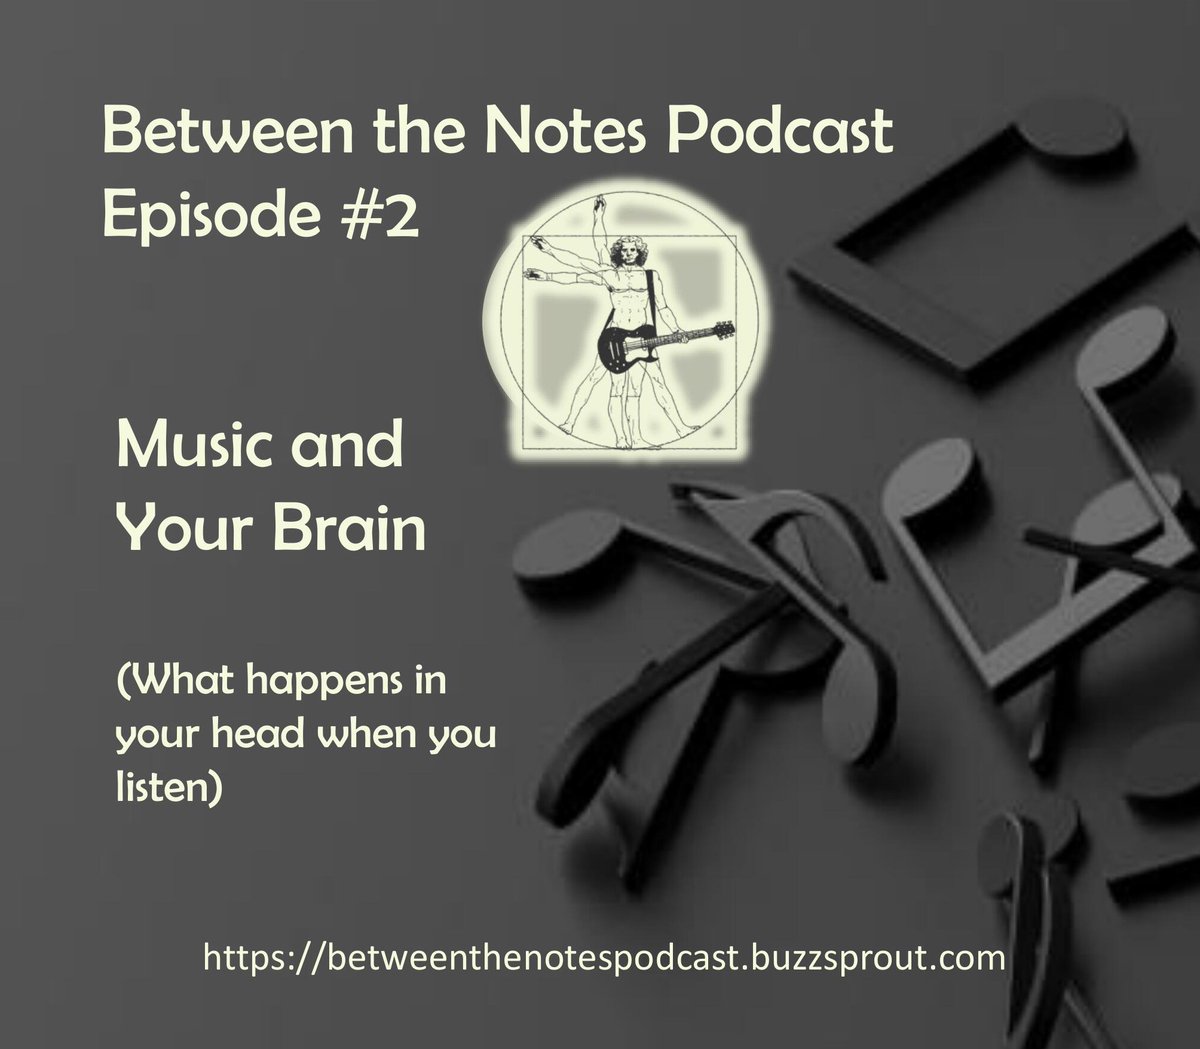 Find out what happens in your head when you listen to music. bit.ly/3QPveJl #Music #podcast #Science #emotion #listening #BetweentheNotes